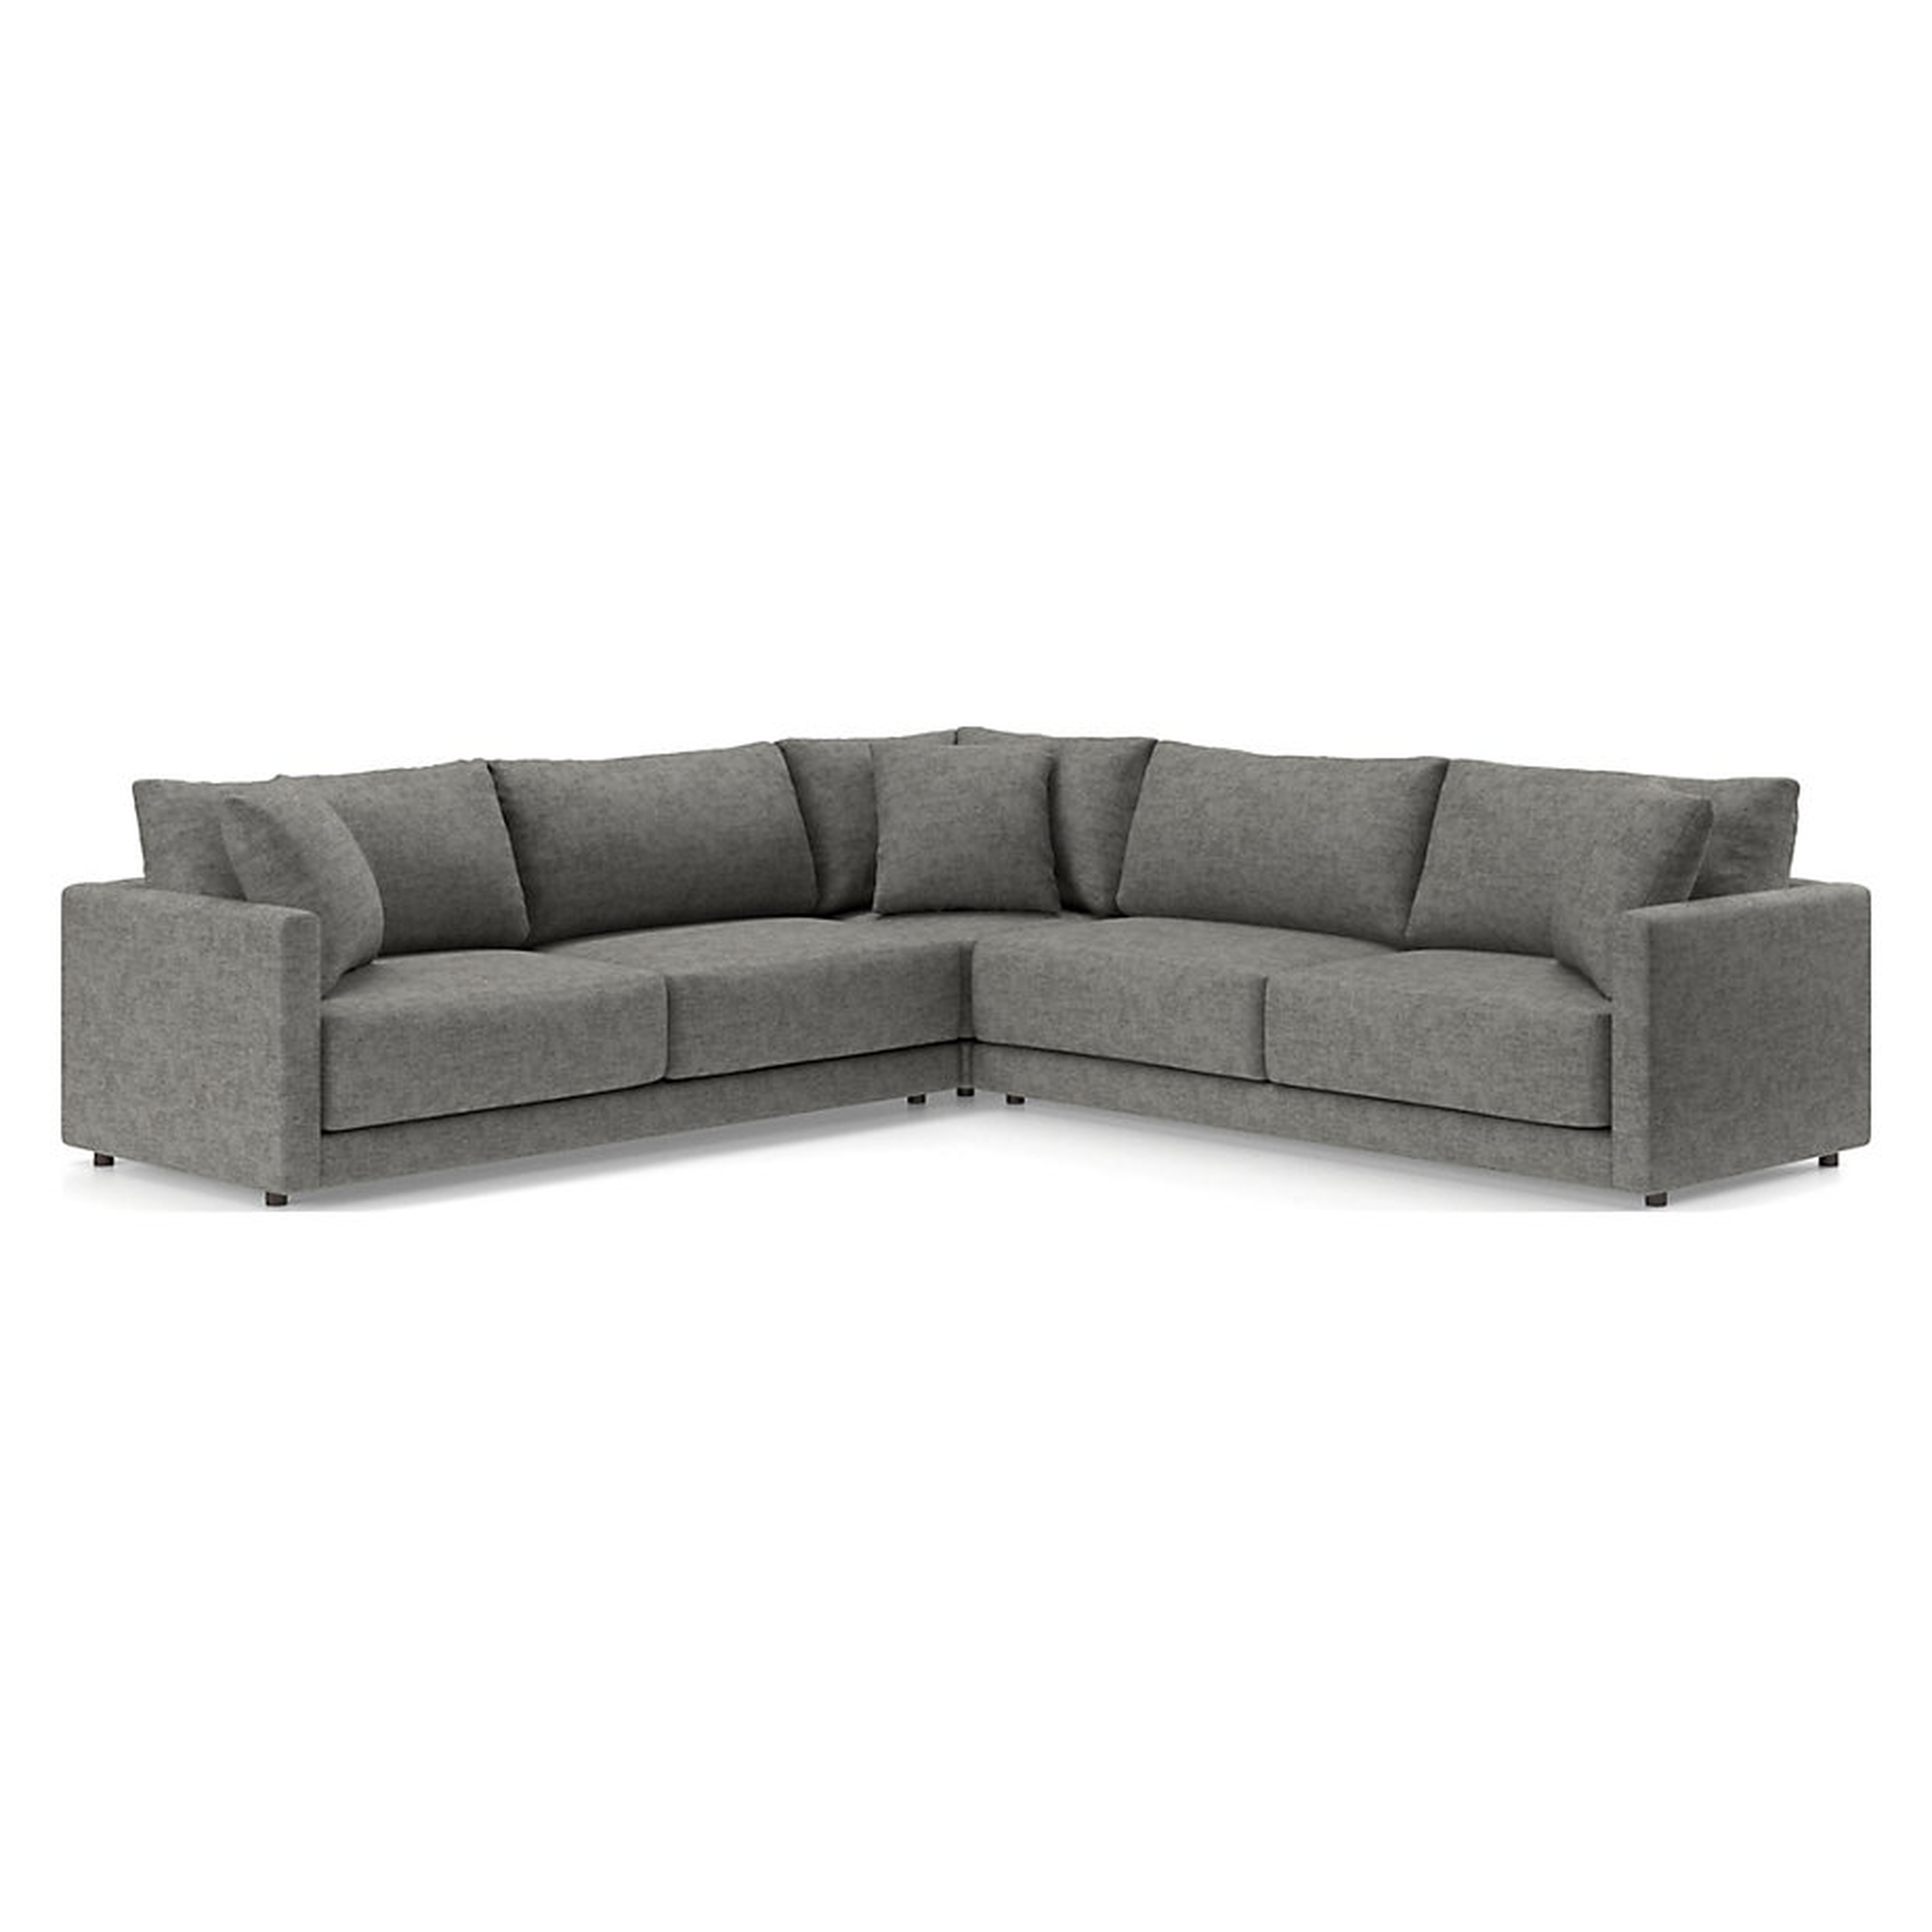 Gather Petite 3-Piece Sectional - Crate and Barrel